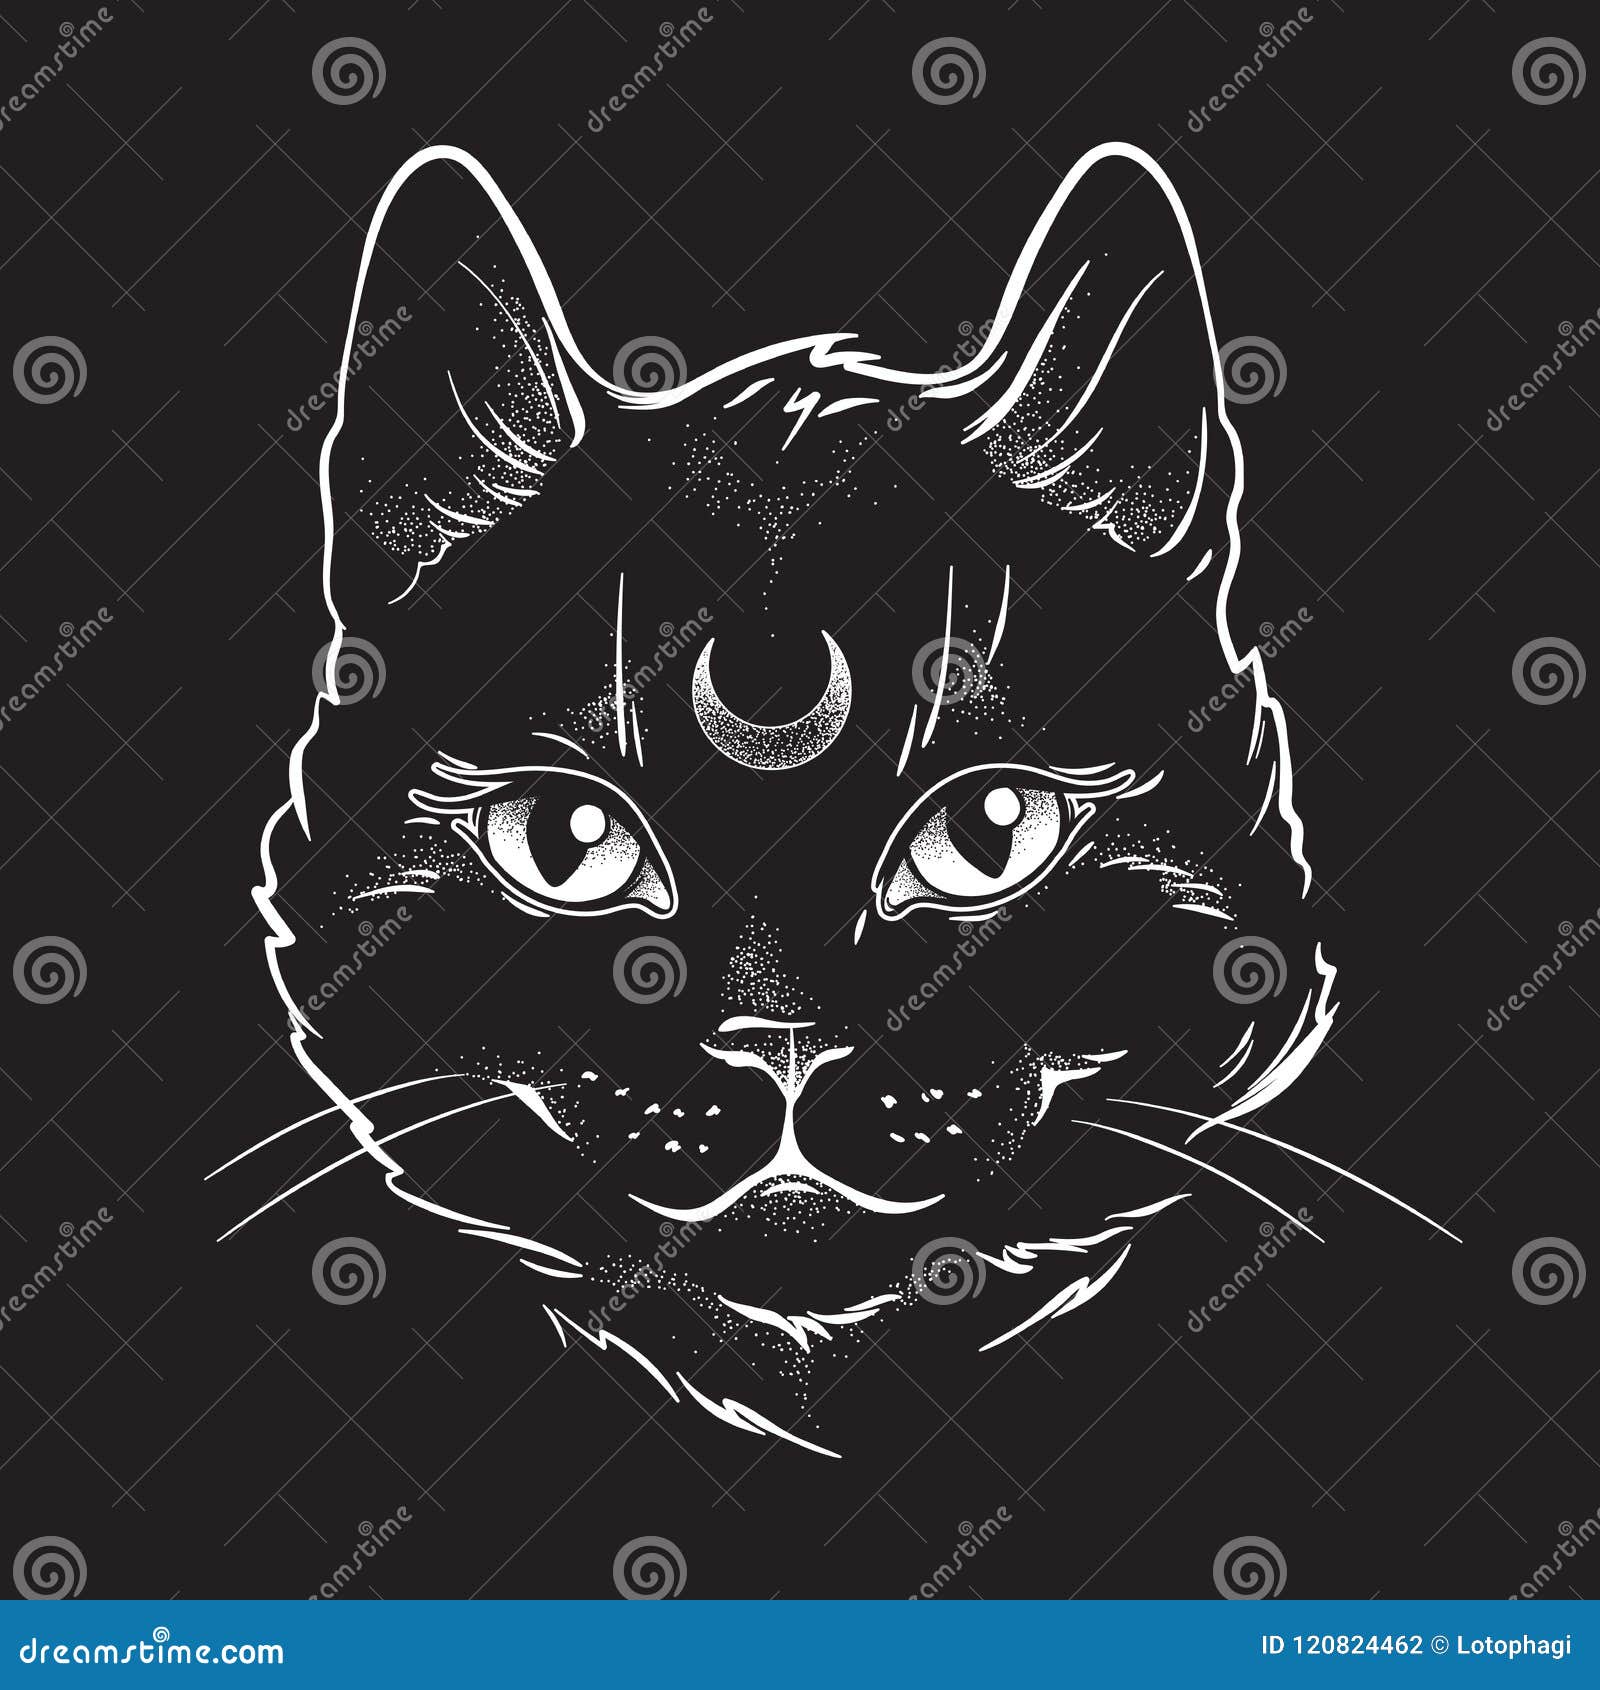 cute black cat with moon on his forehead line art and dot work. wiccan familiar spirit, halloween or pagan witchcraft theme tapest